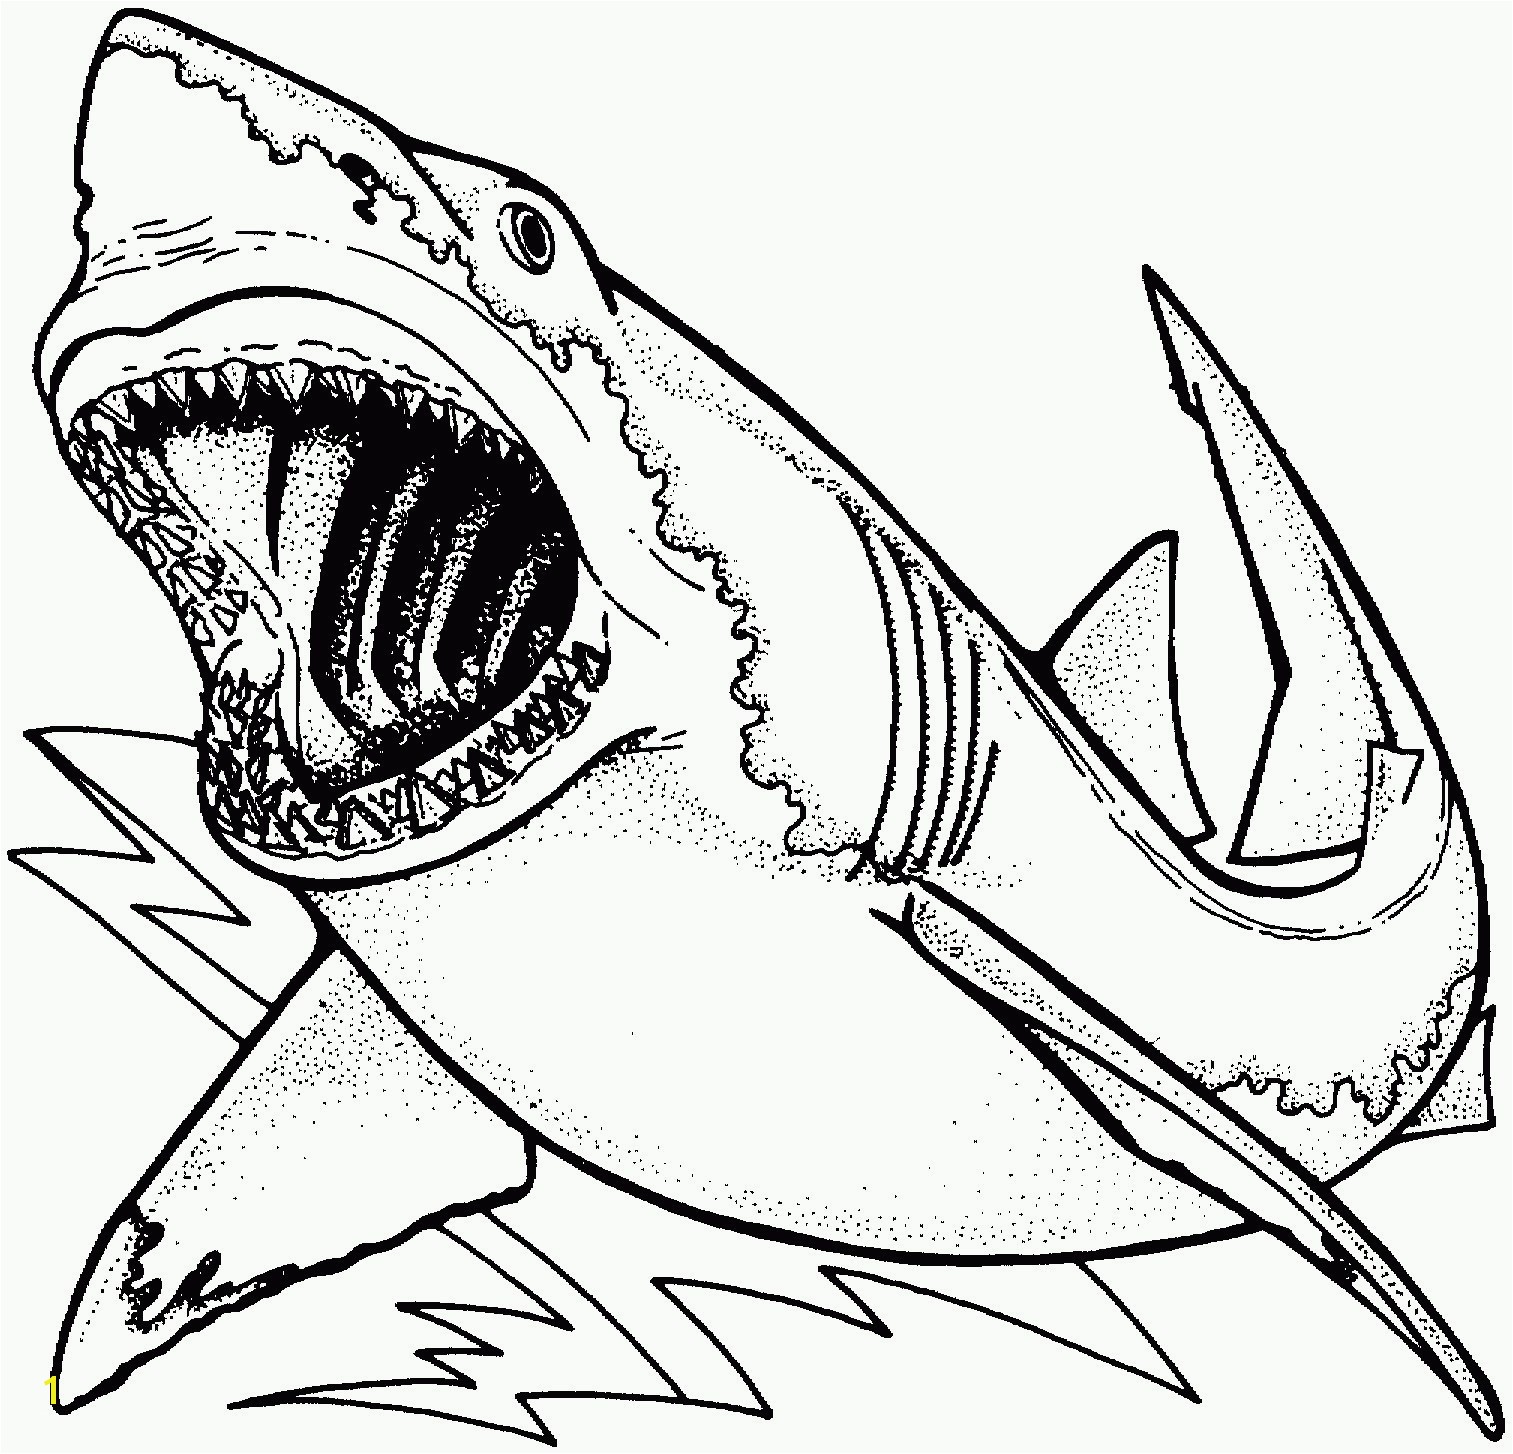 Shark Coloring Page Great White Shark Coloring Pages Awesome Bull Shark Drawing At